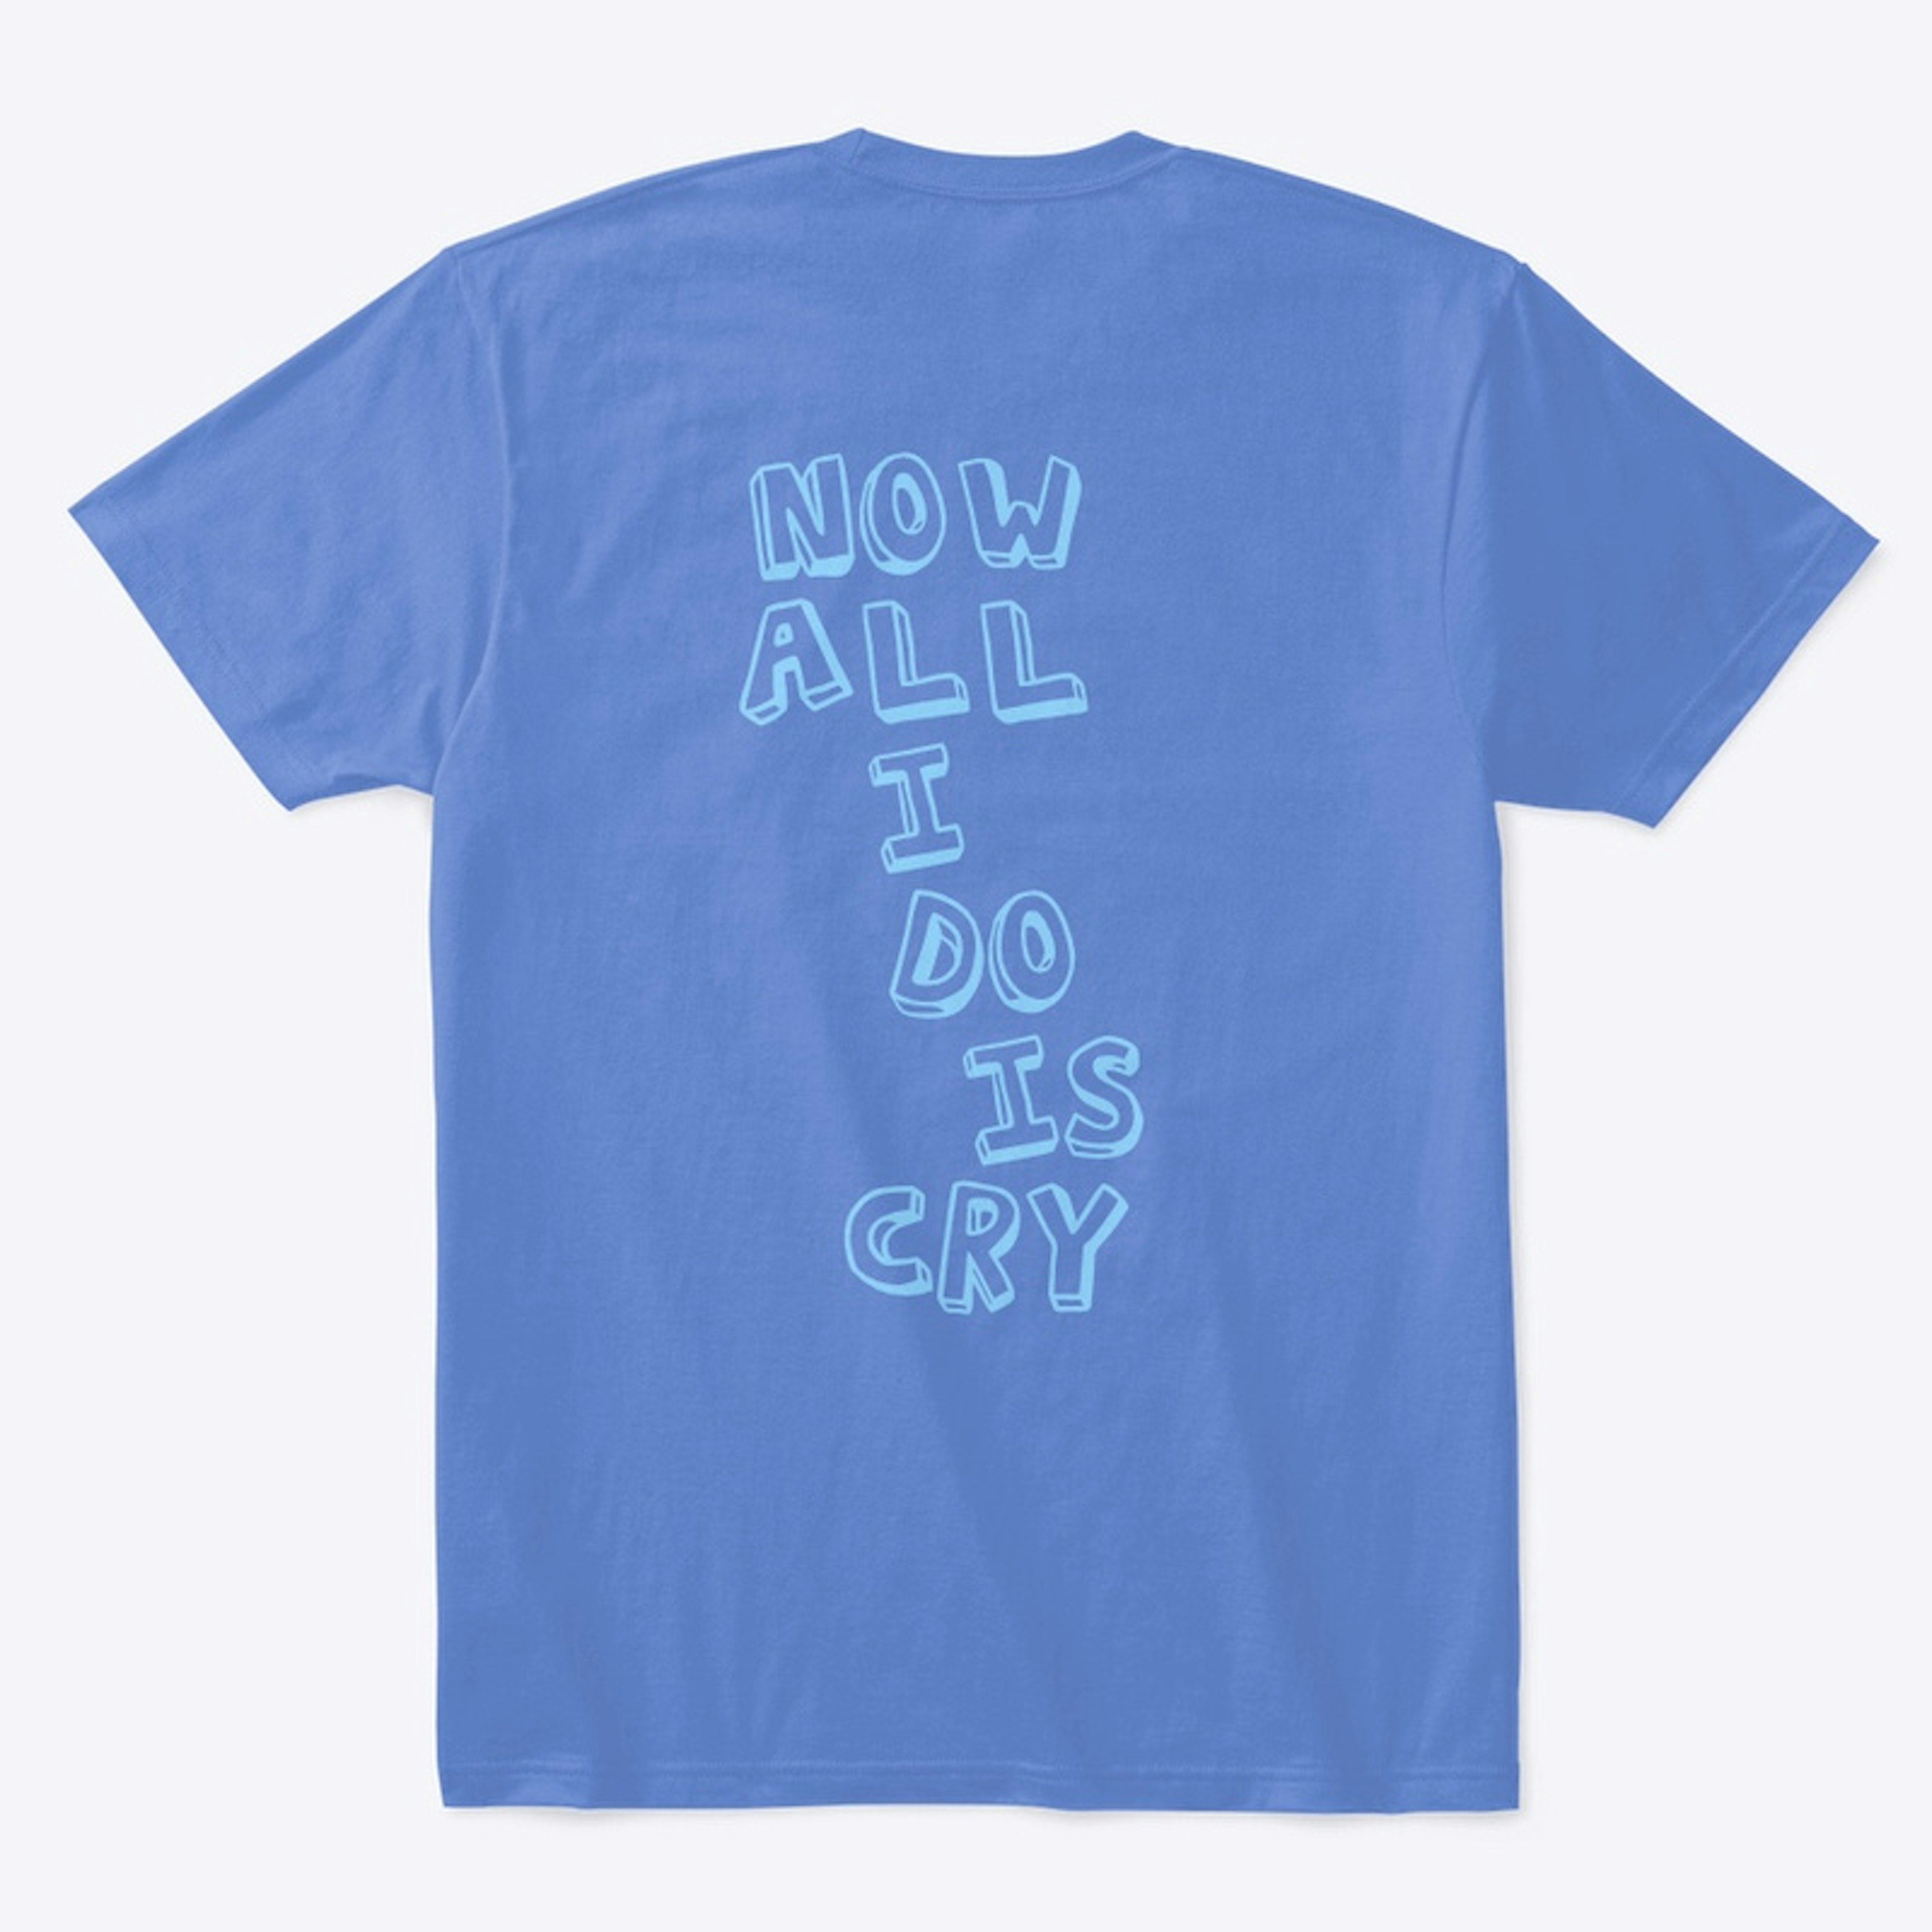 all i do is cry t-shirt